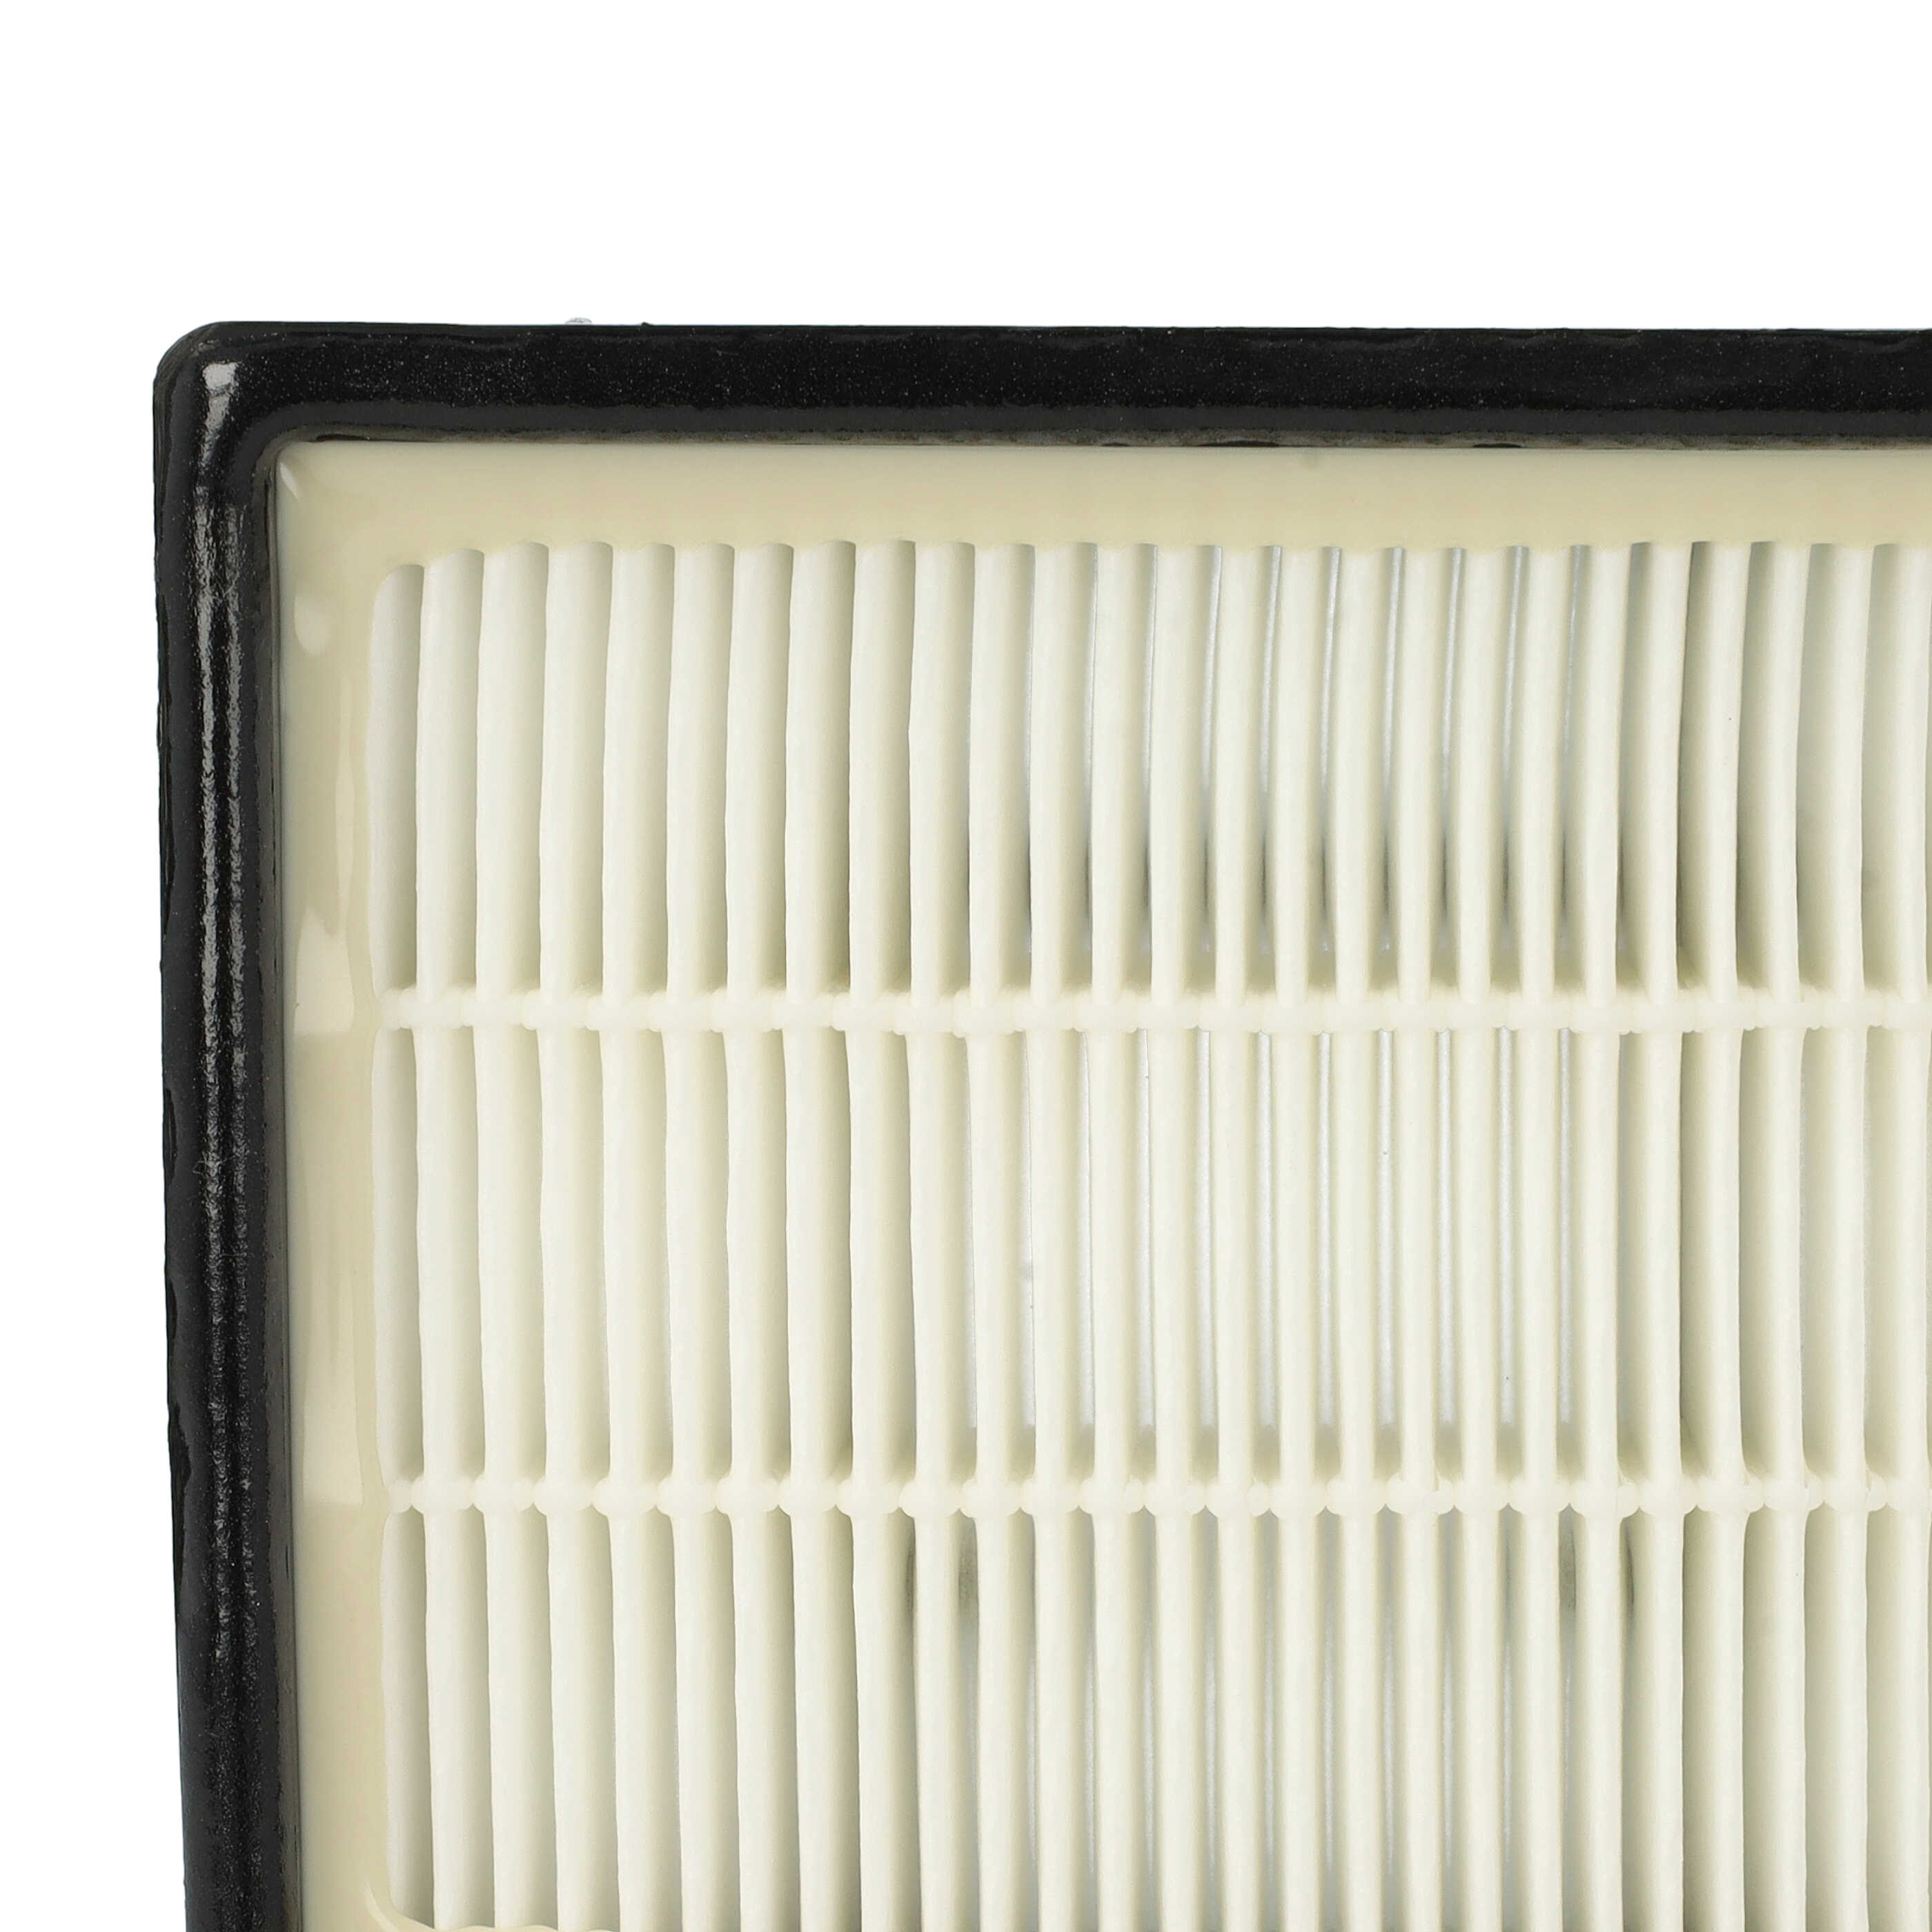 1x HEPA filter replaces AEG/Electrolux 4055116125, 1924992207 for AEG Vacuum Cleaner, filter class H11